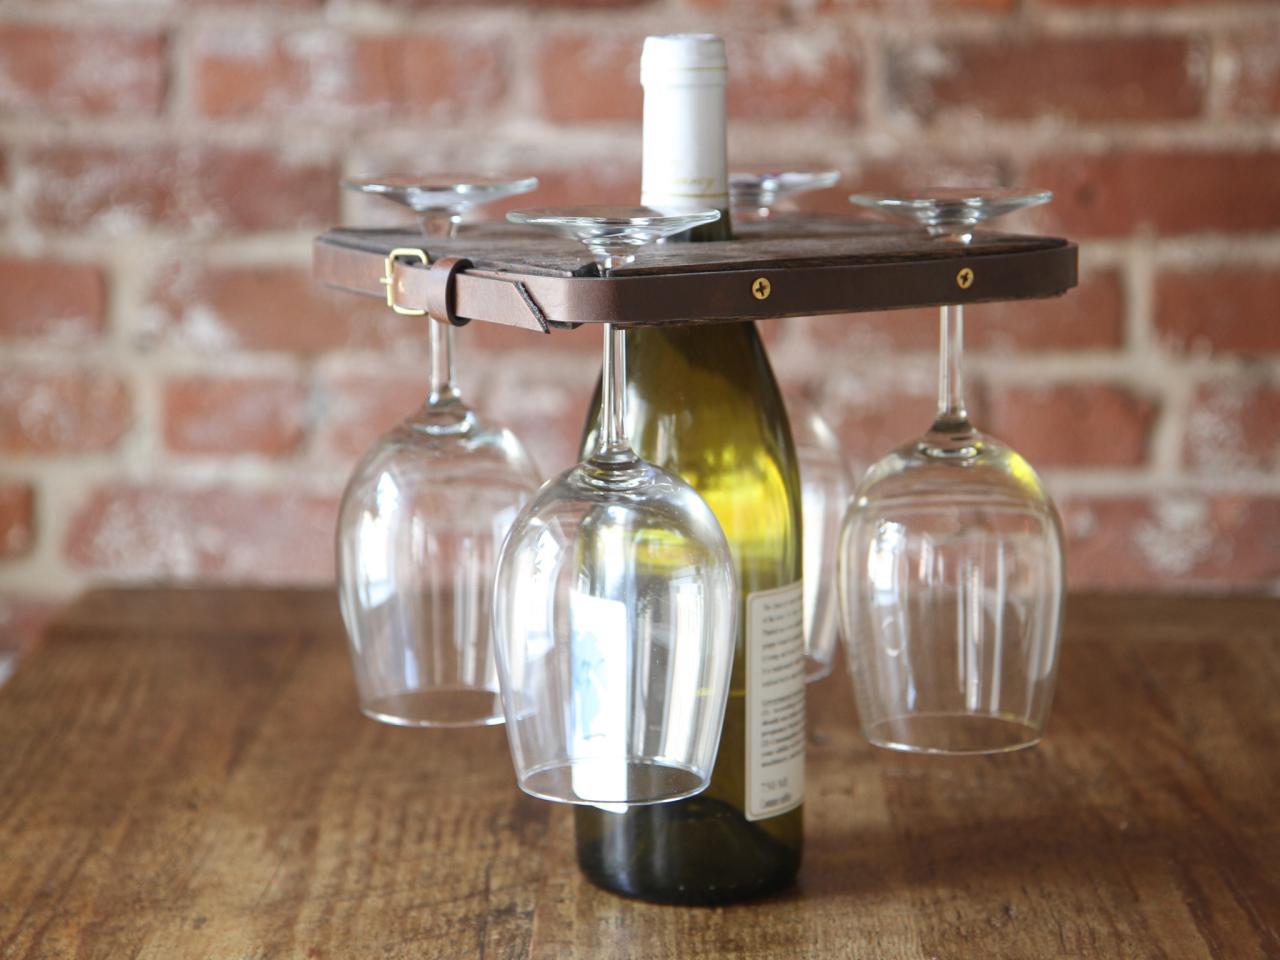 DIY reclaimed wood wine bottle and glass caddy - DIY projects for